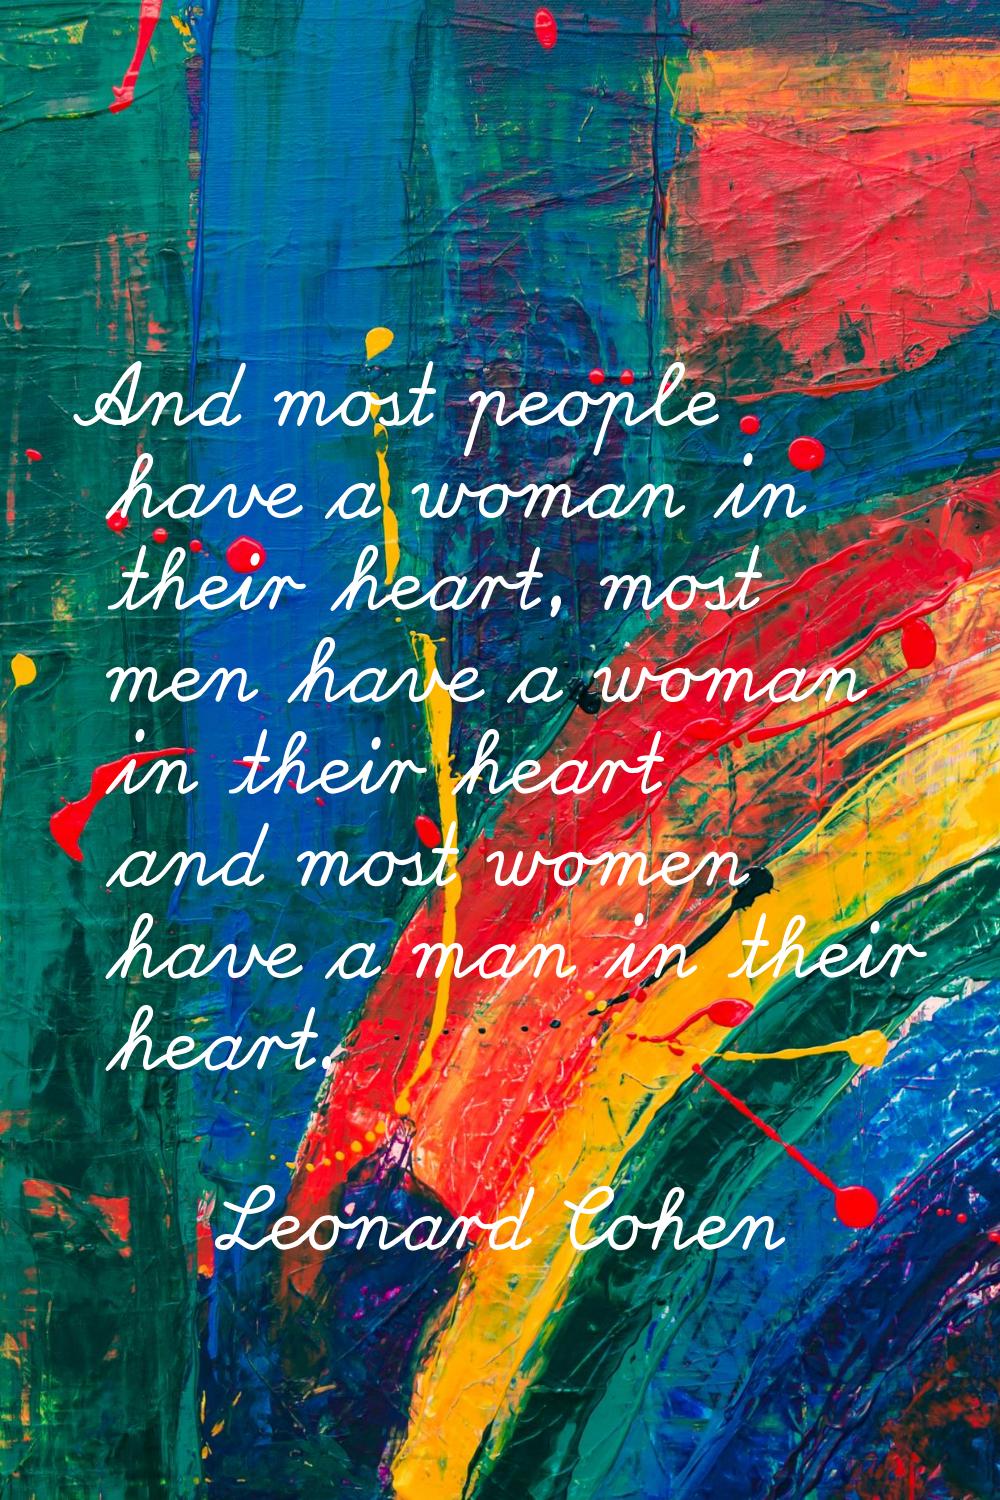 And most people have a woman in their heart, most men have a woman in their heart and most women ha